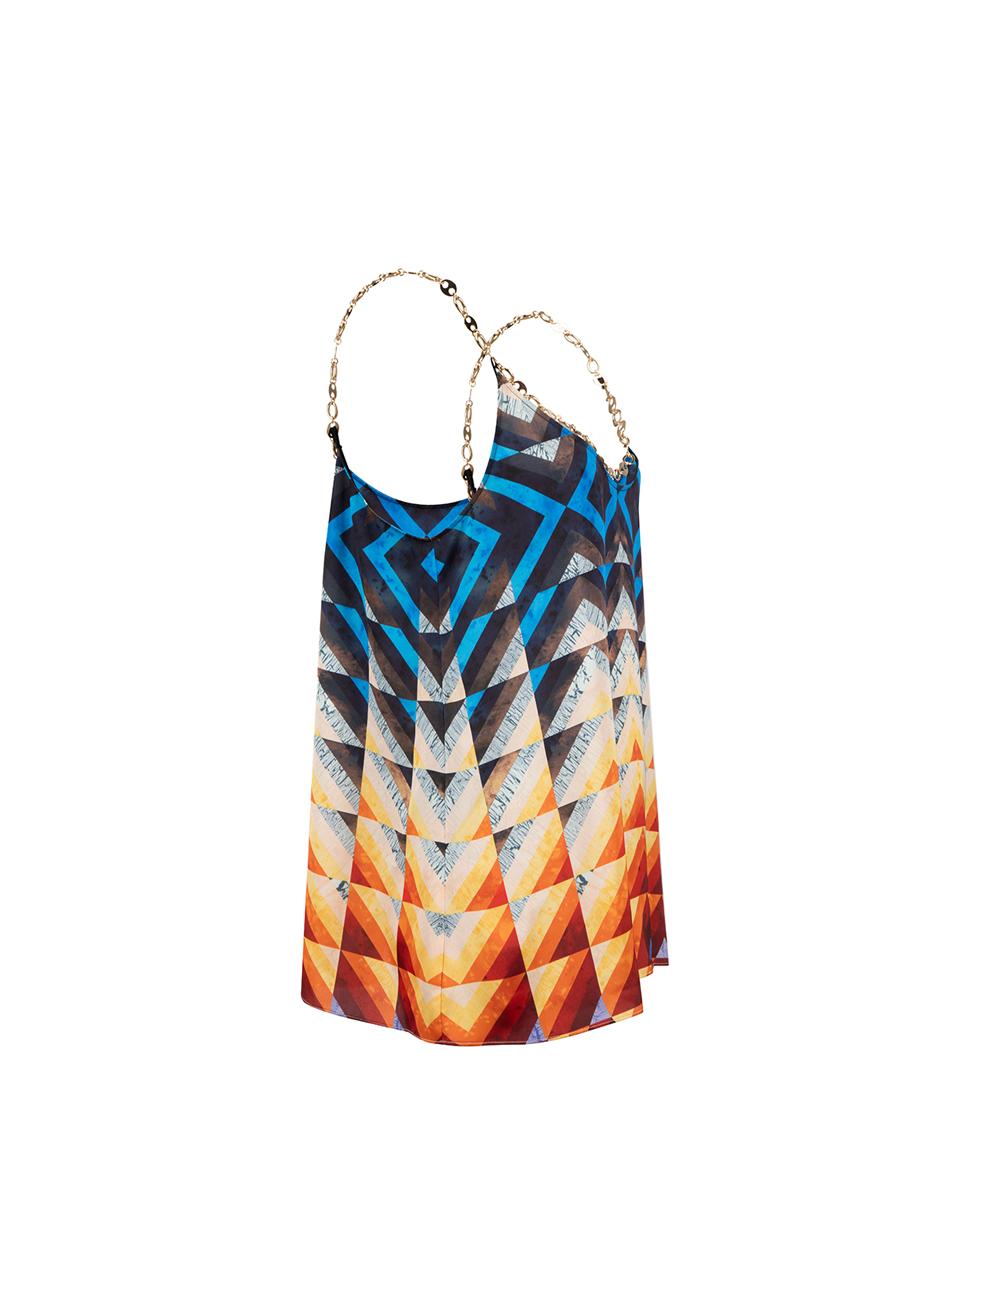 CONDITION is Very good. Hardly any visible wear to top is evident on this used Paco Rabanne designer resale item.



Details


Multicolour

Polyester

Tank top

Geometric pattern

Blue to orange ombré

Gold chain straps





Made in